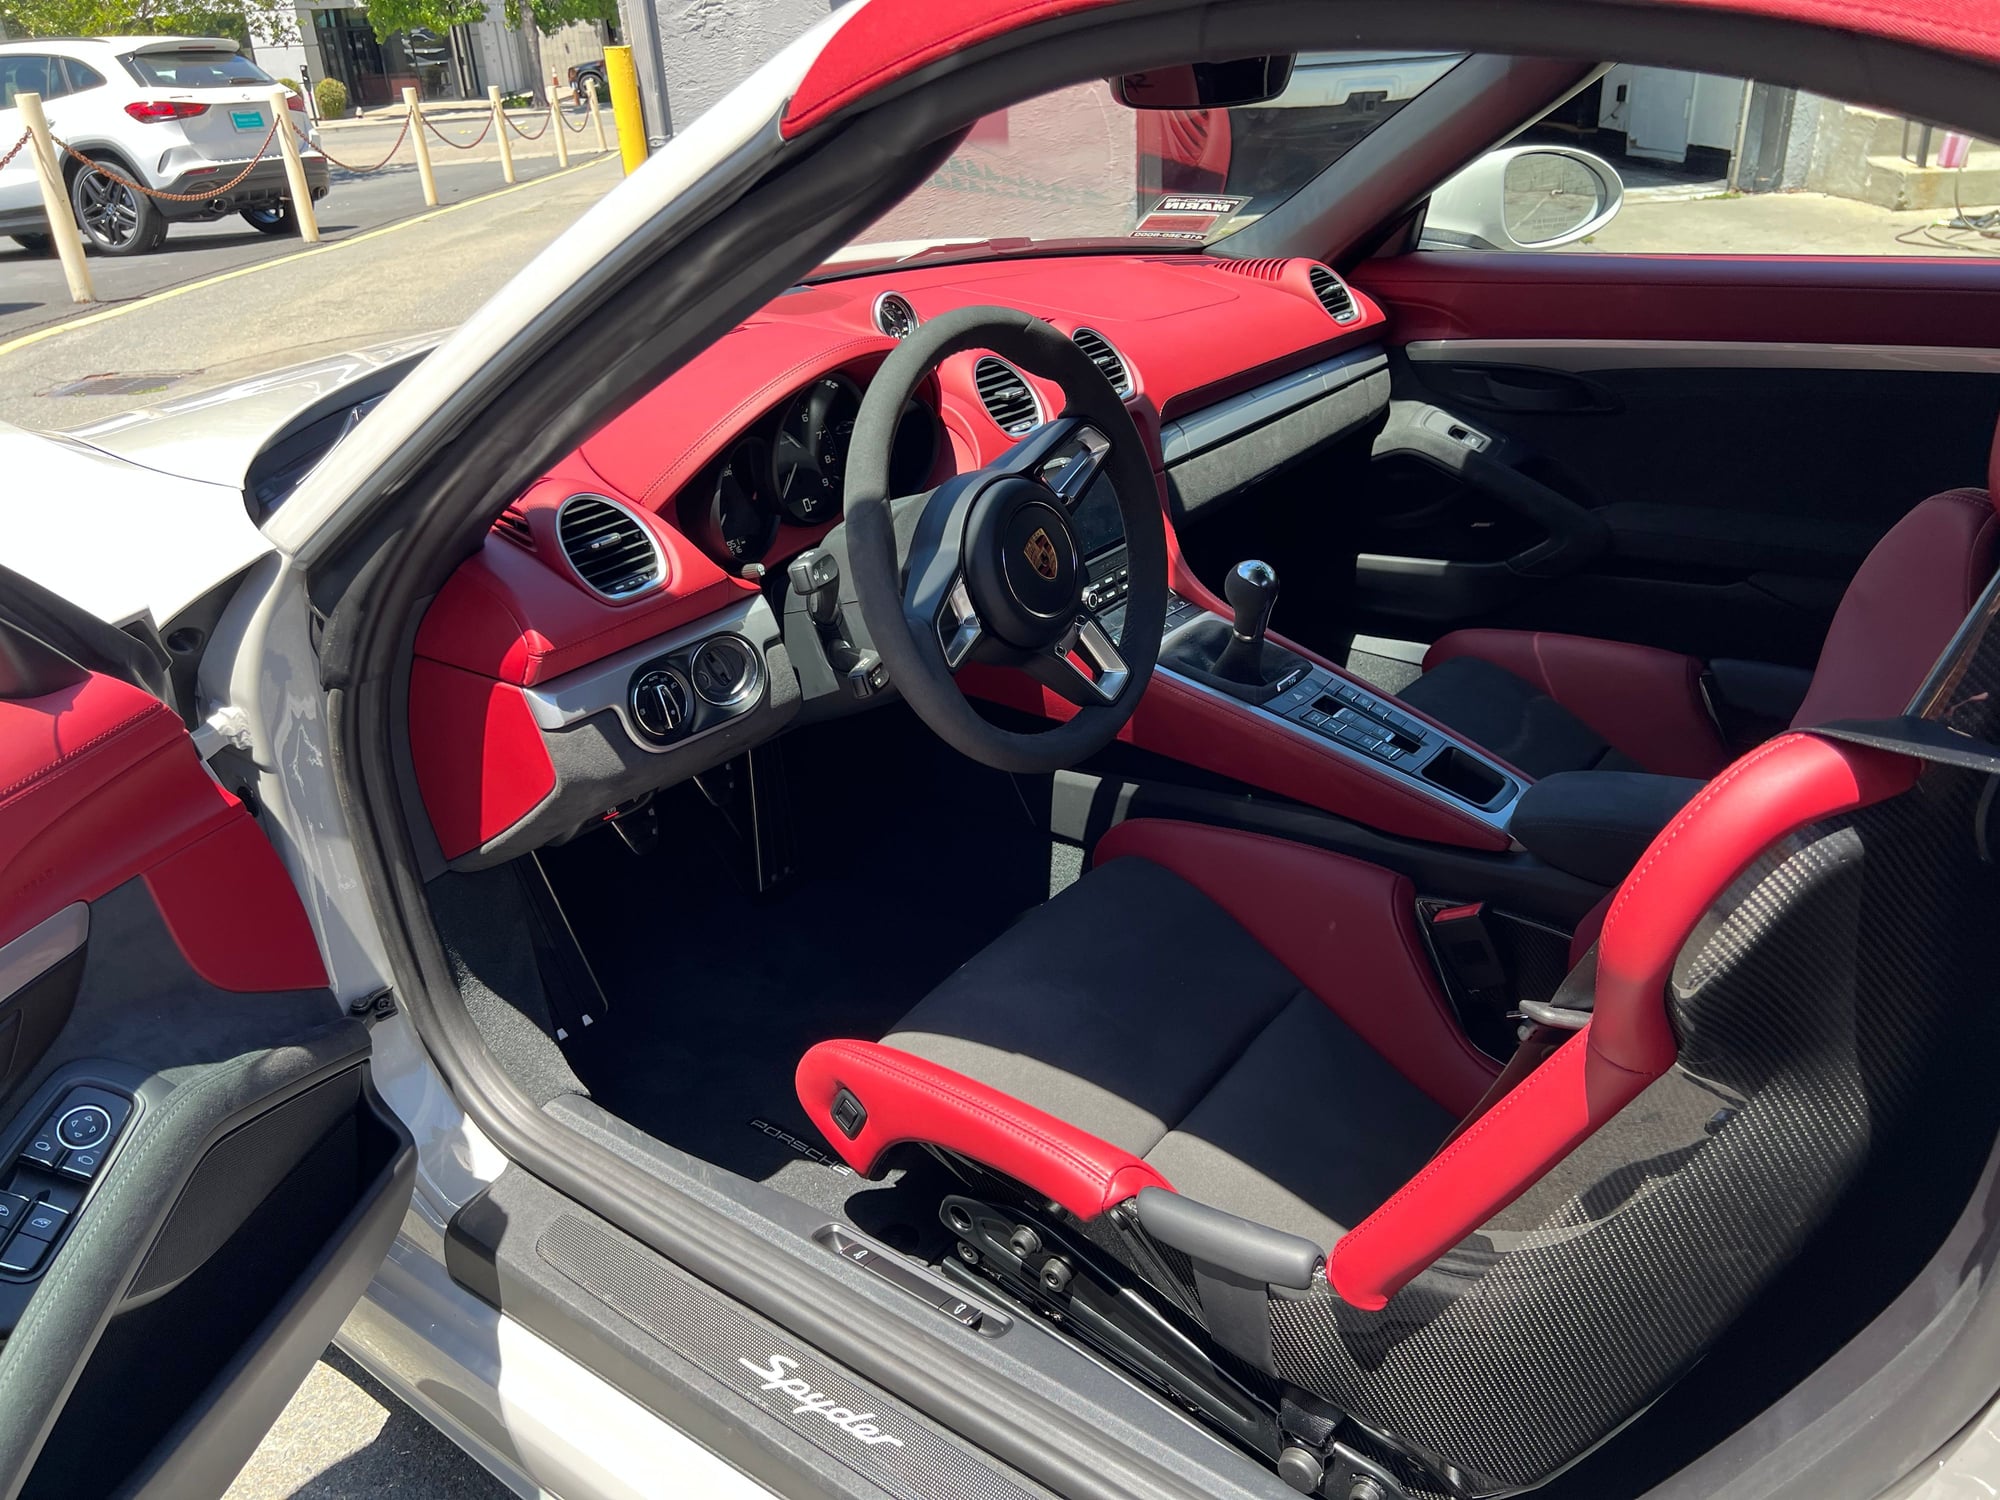 2022 Porsche 718 - 2022 718 Spyder for sale - Used - VIN WP0CC2A80NS235434 - 3,750 Miles - 6 cyl - 2WD - Manual - Convertible - Gray - Pleasanton, CA 94566, United States